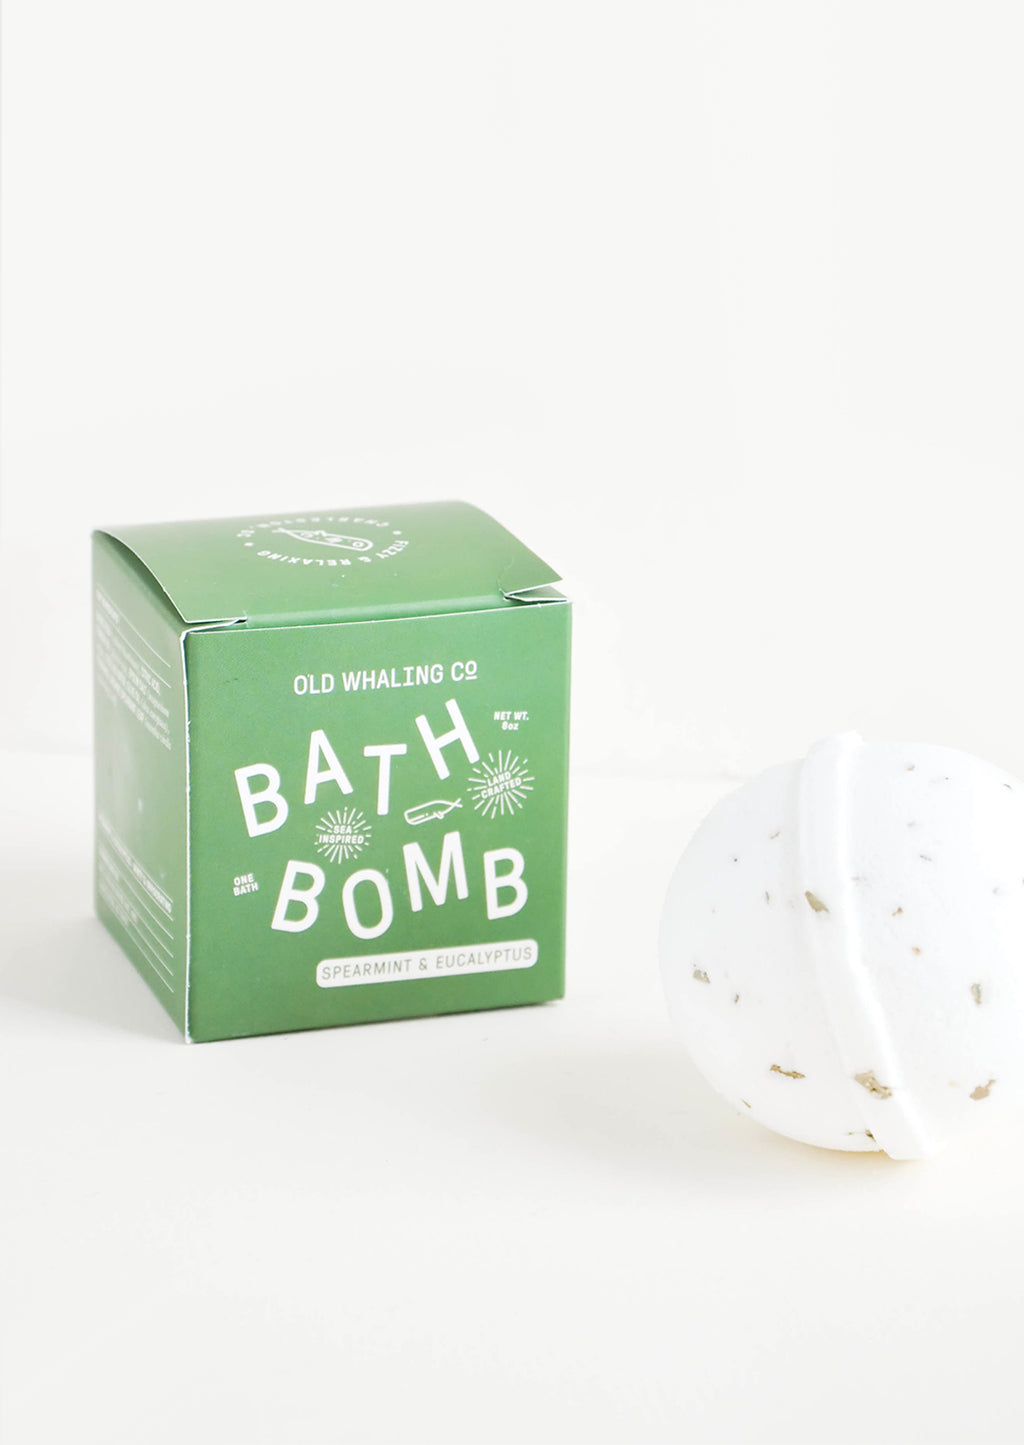 Spearmint & Eucalyptus: White colored, round bath bomb with green box packaging